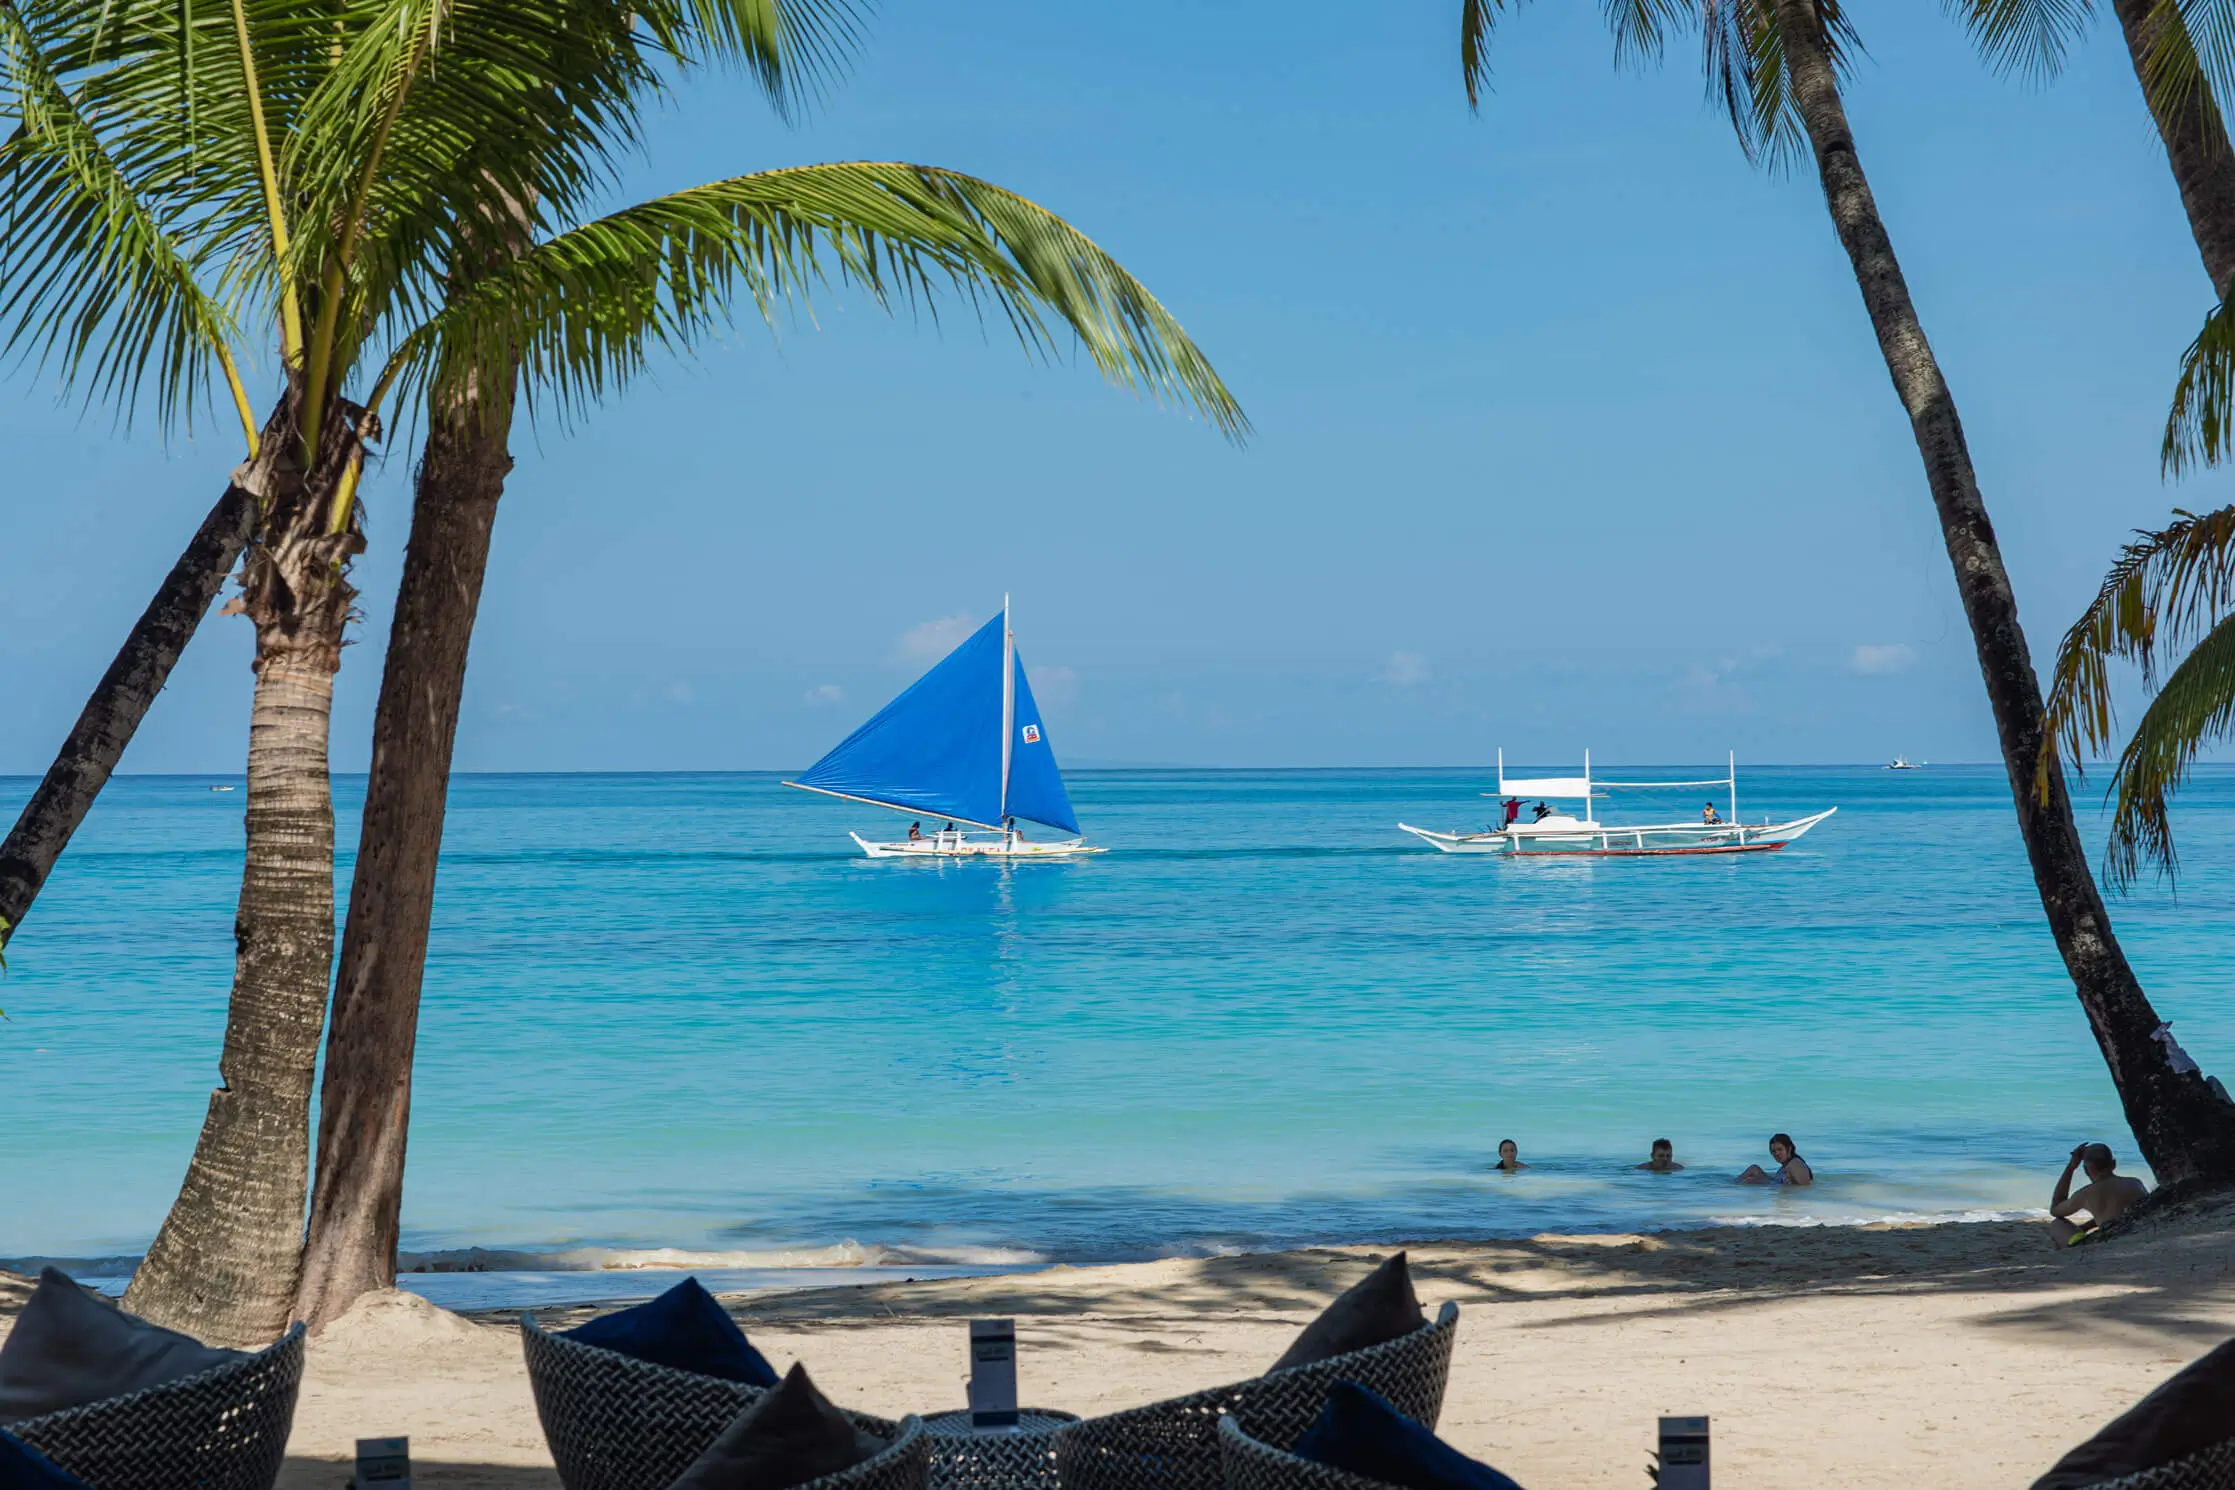 Idyllic beachfront view at Villa Caemilla Beach Boutique Hotel in Boracay, showcasing a traditional sailboat on the clear blue waters. The beach is lined with palm trees and inviting lounge chairs, perfect for relaxation.